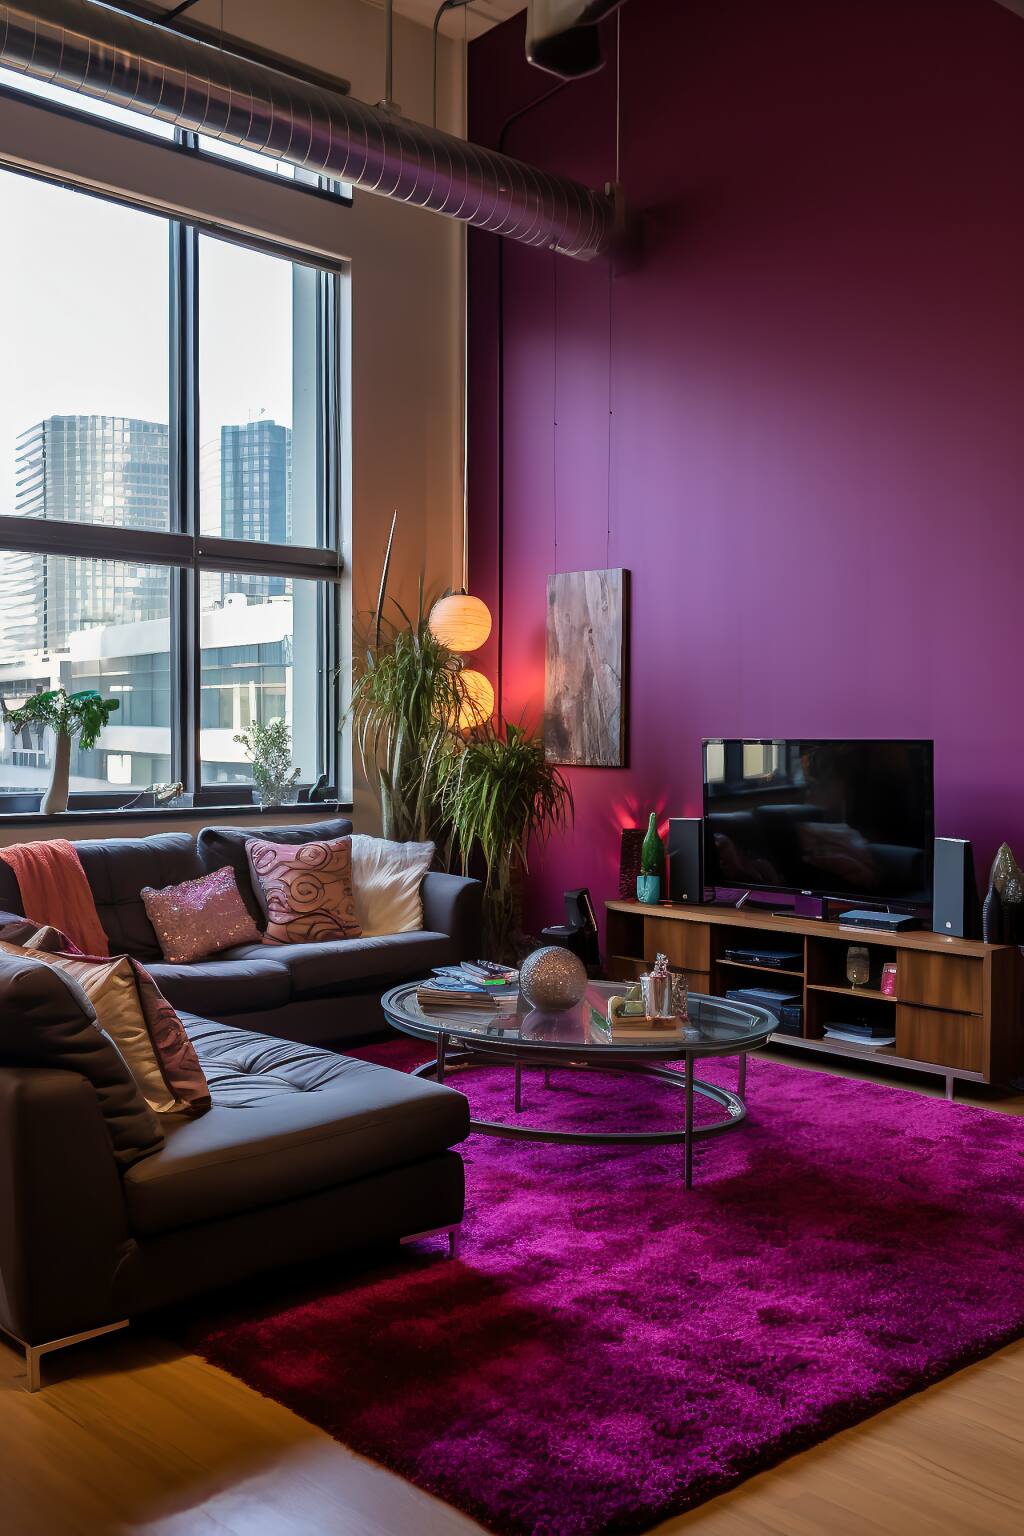 A Chic Urban Romantic Living Room With Magenta Walls, A Dark Grey Sofa With Pink Pillows, A Lush Shag Rug, And Modern Decor Elements.